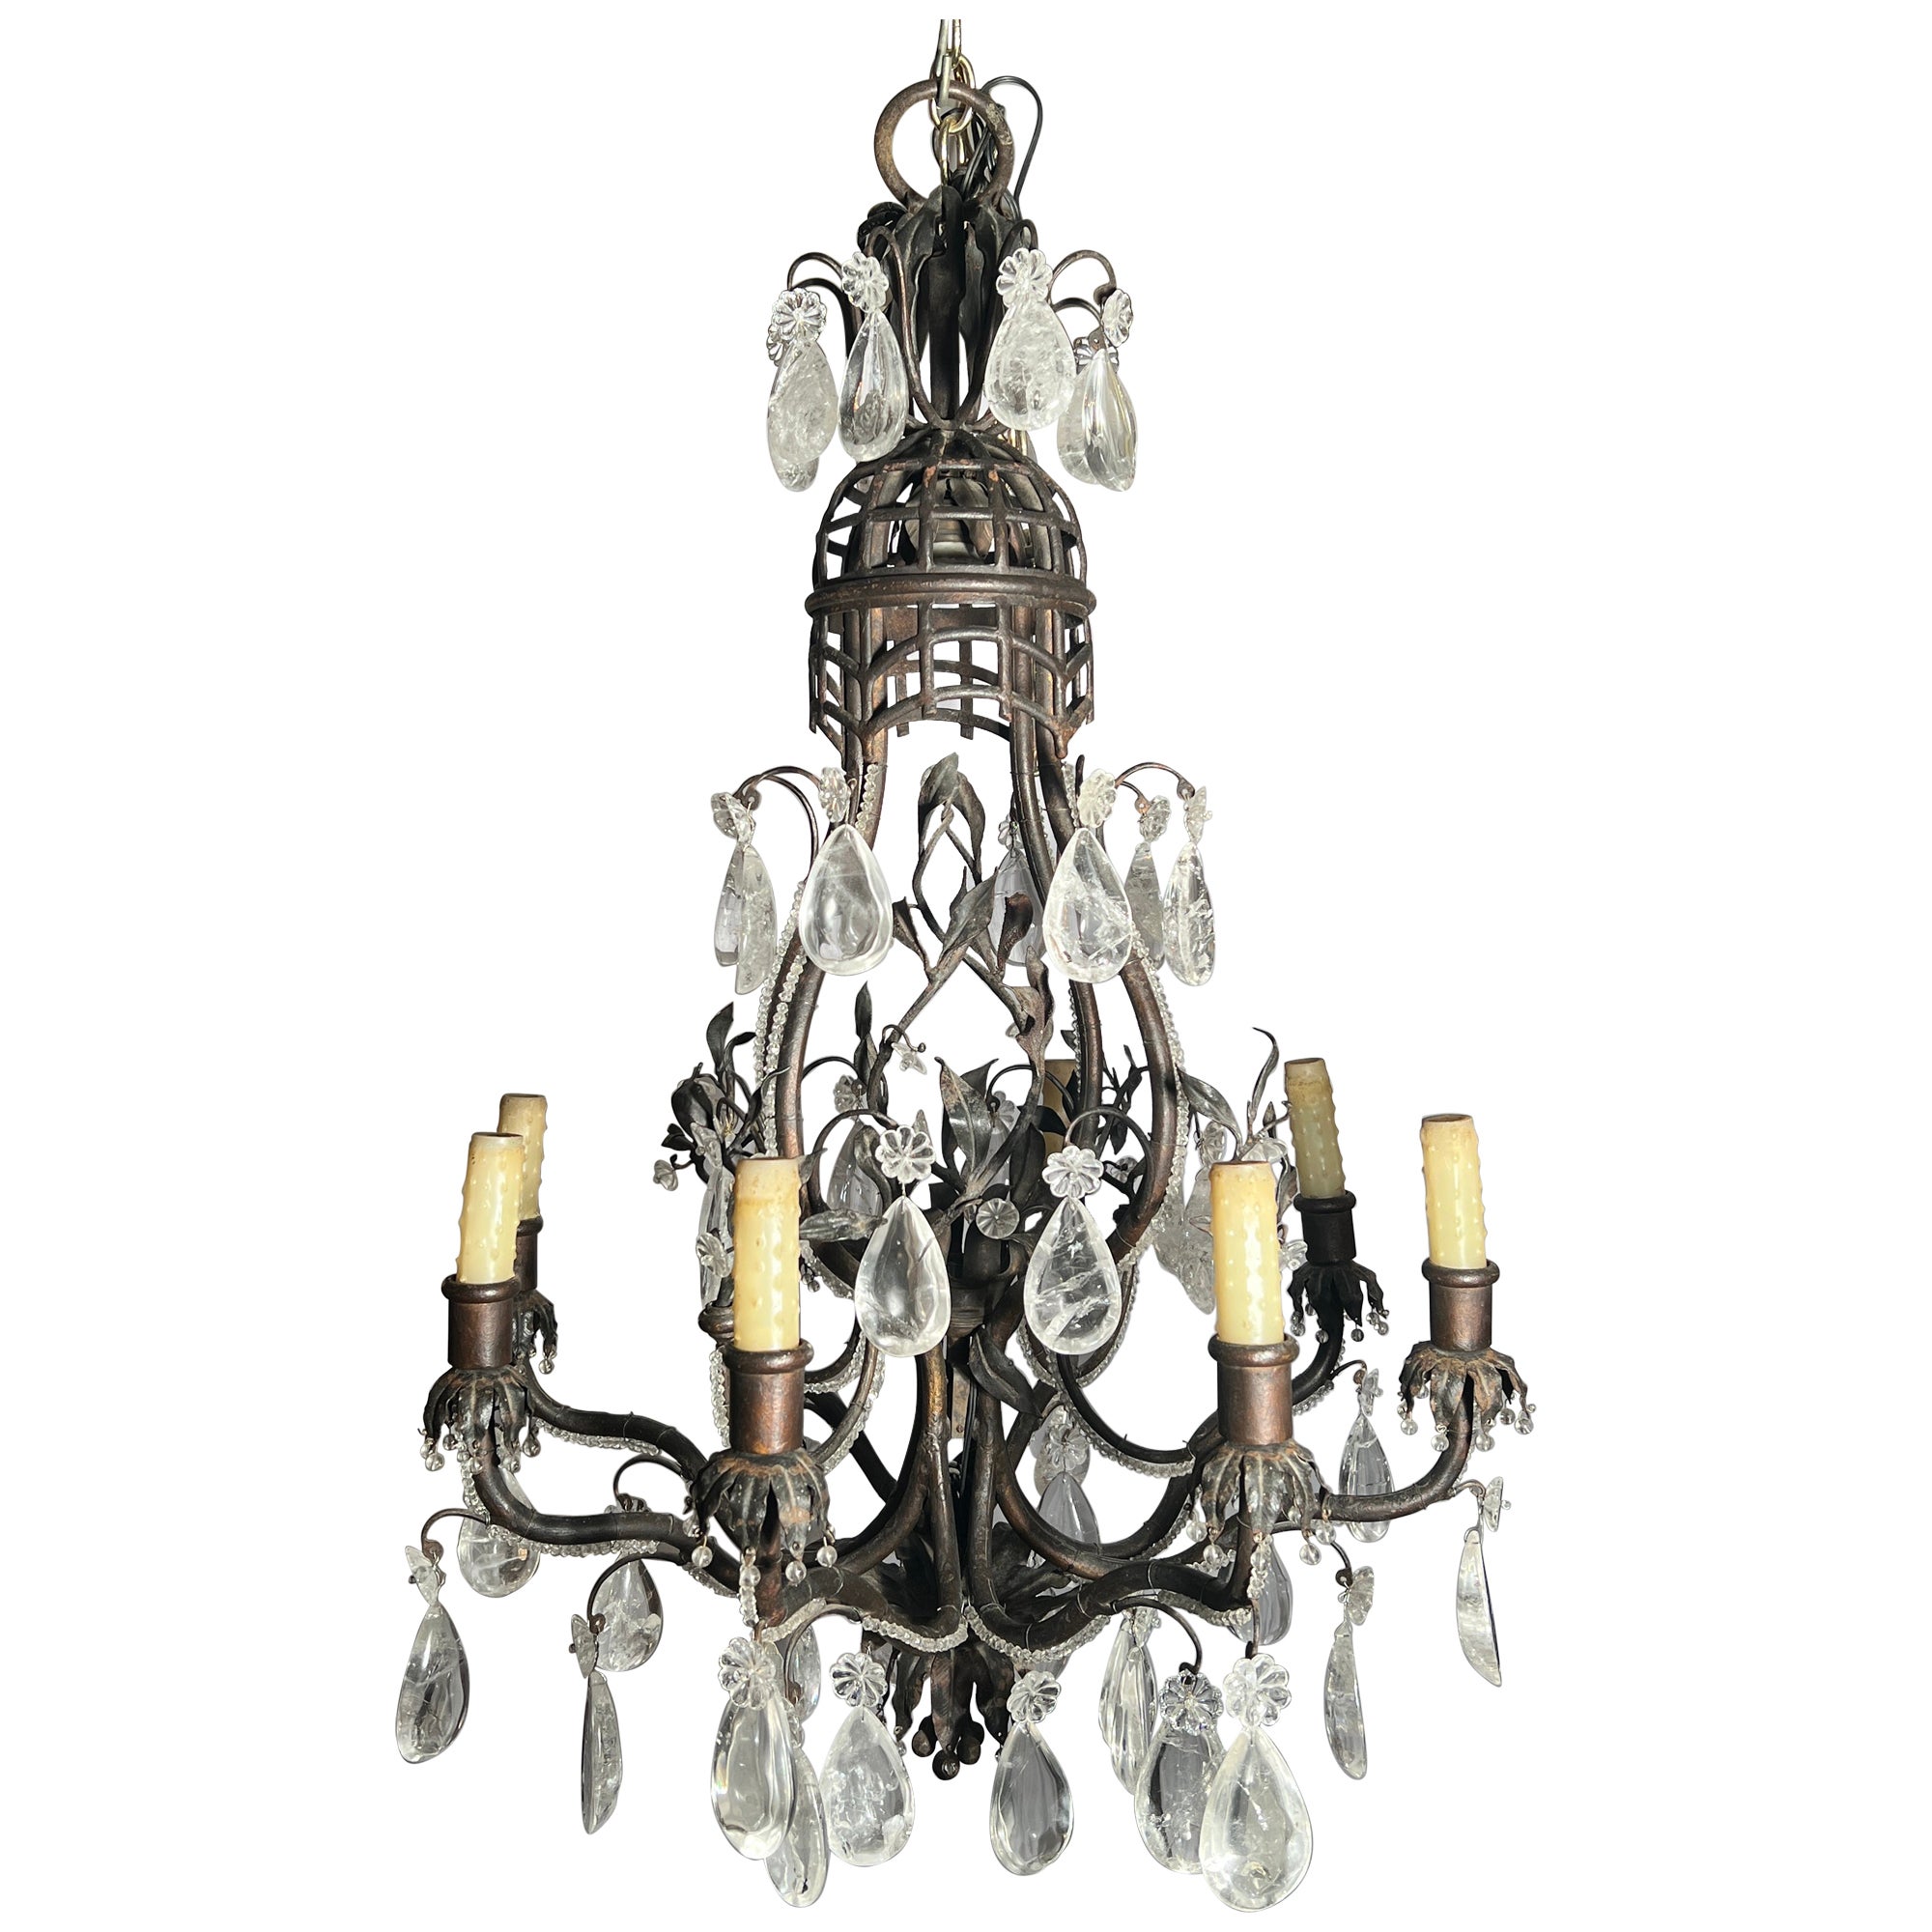 Antique 19th Century French Wrought Iron Chandelier with Rock Crystal Prisms. For Sale